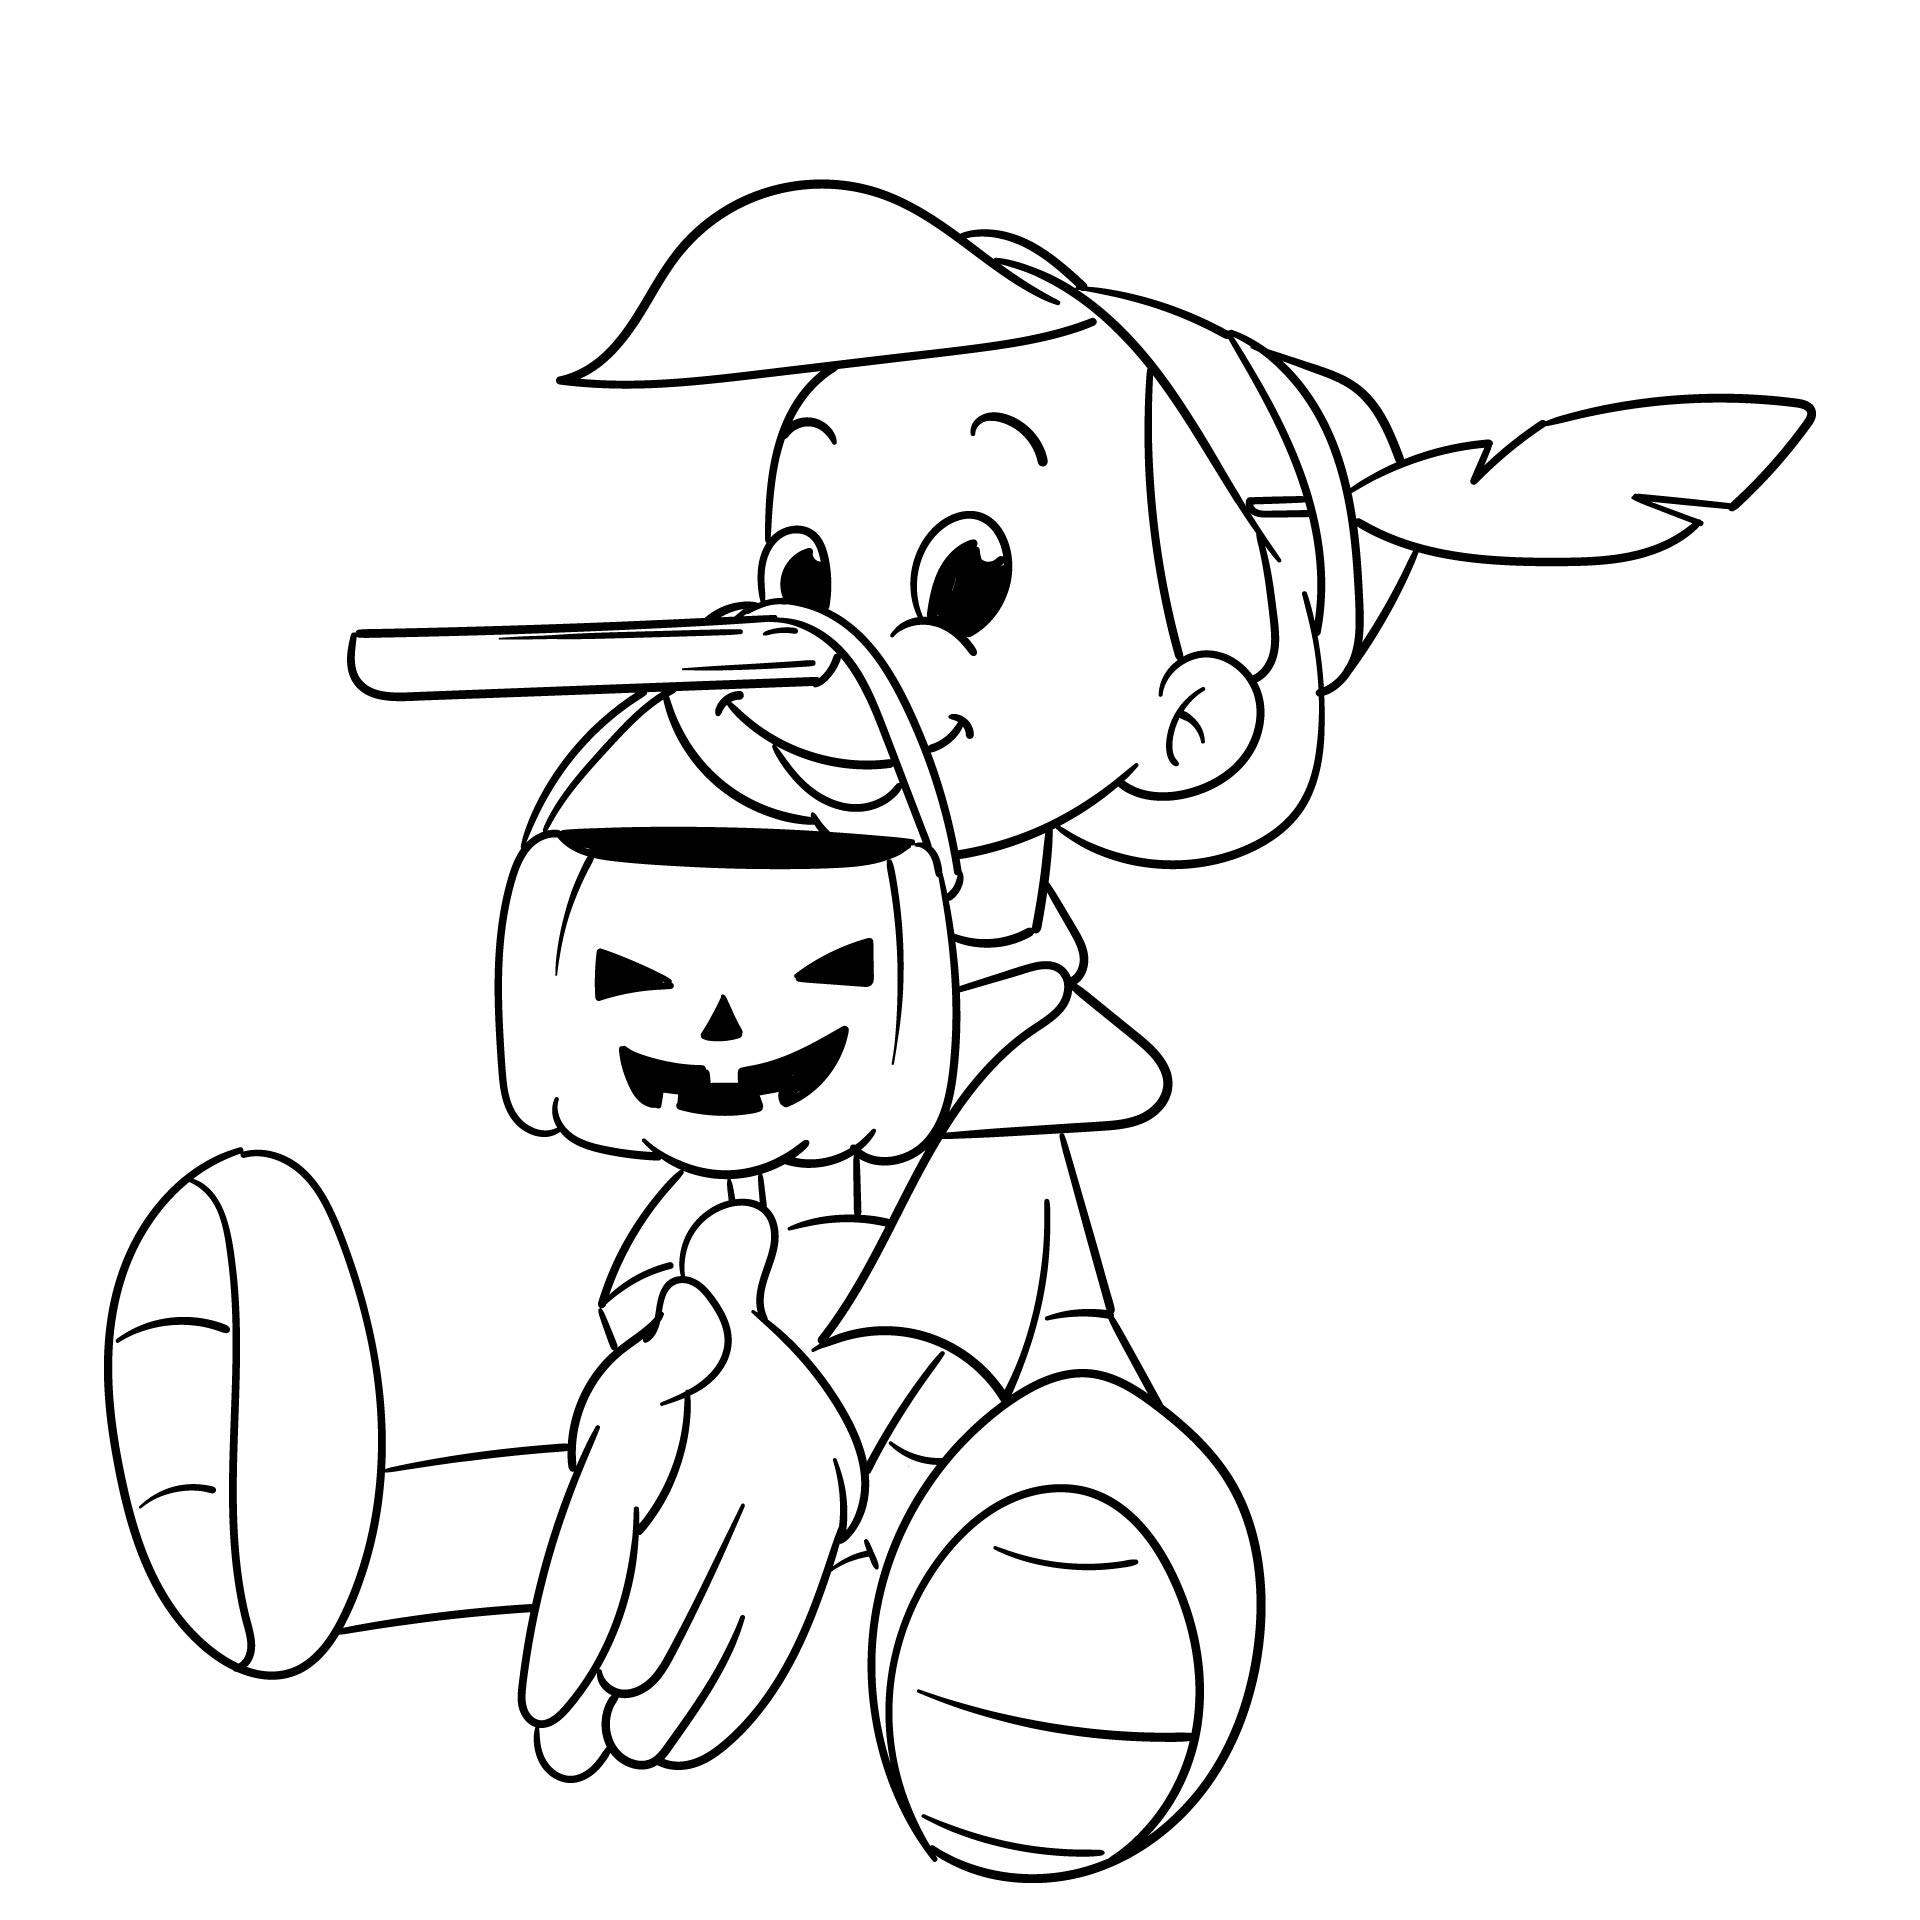 15-best-disney-halloween-coloring-pages-printable-pdf-for-free-at